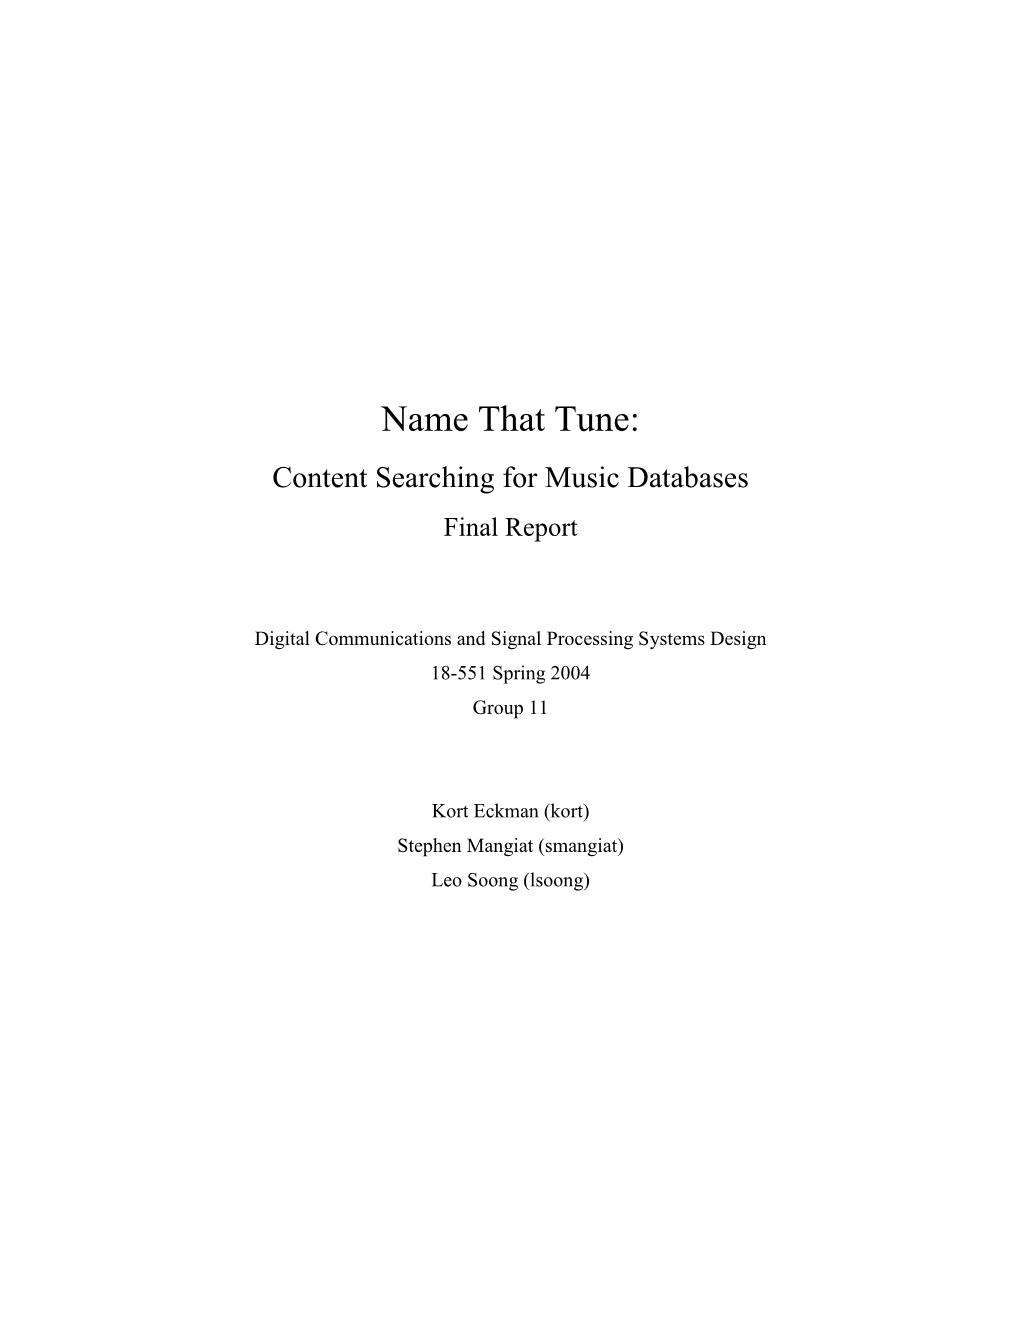 Name That Tune: Content Searching for Music Databases Final Report